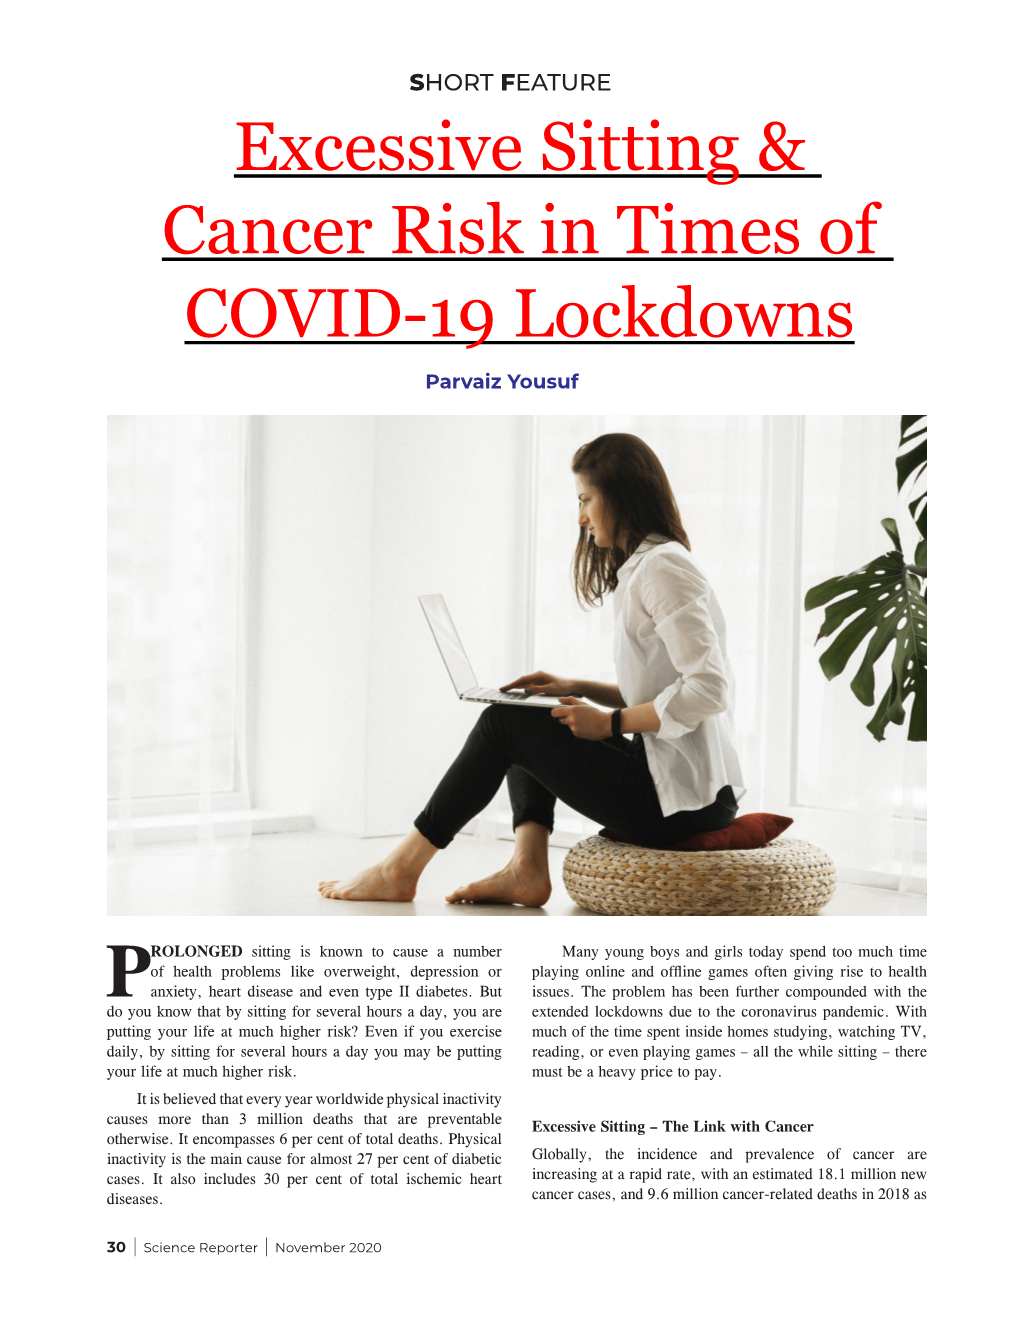 Excessive Sitting & Cancer Risk in Times of COVID-19 Lockdowns